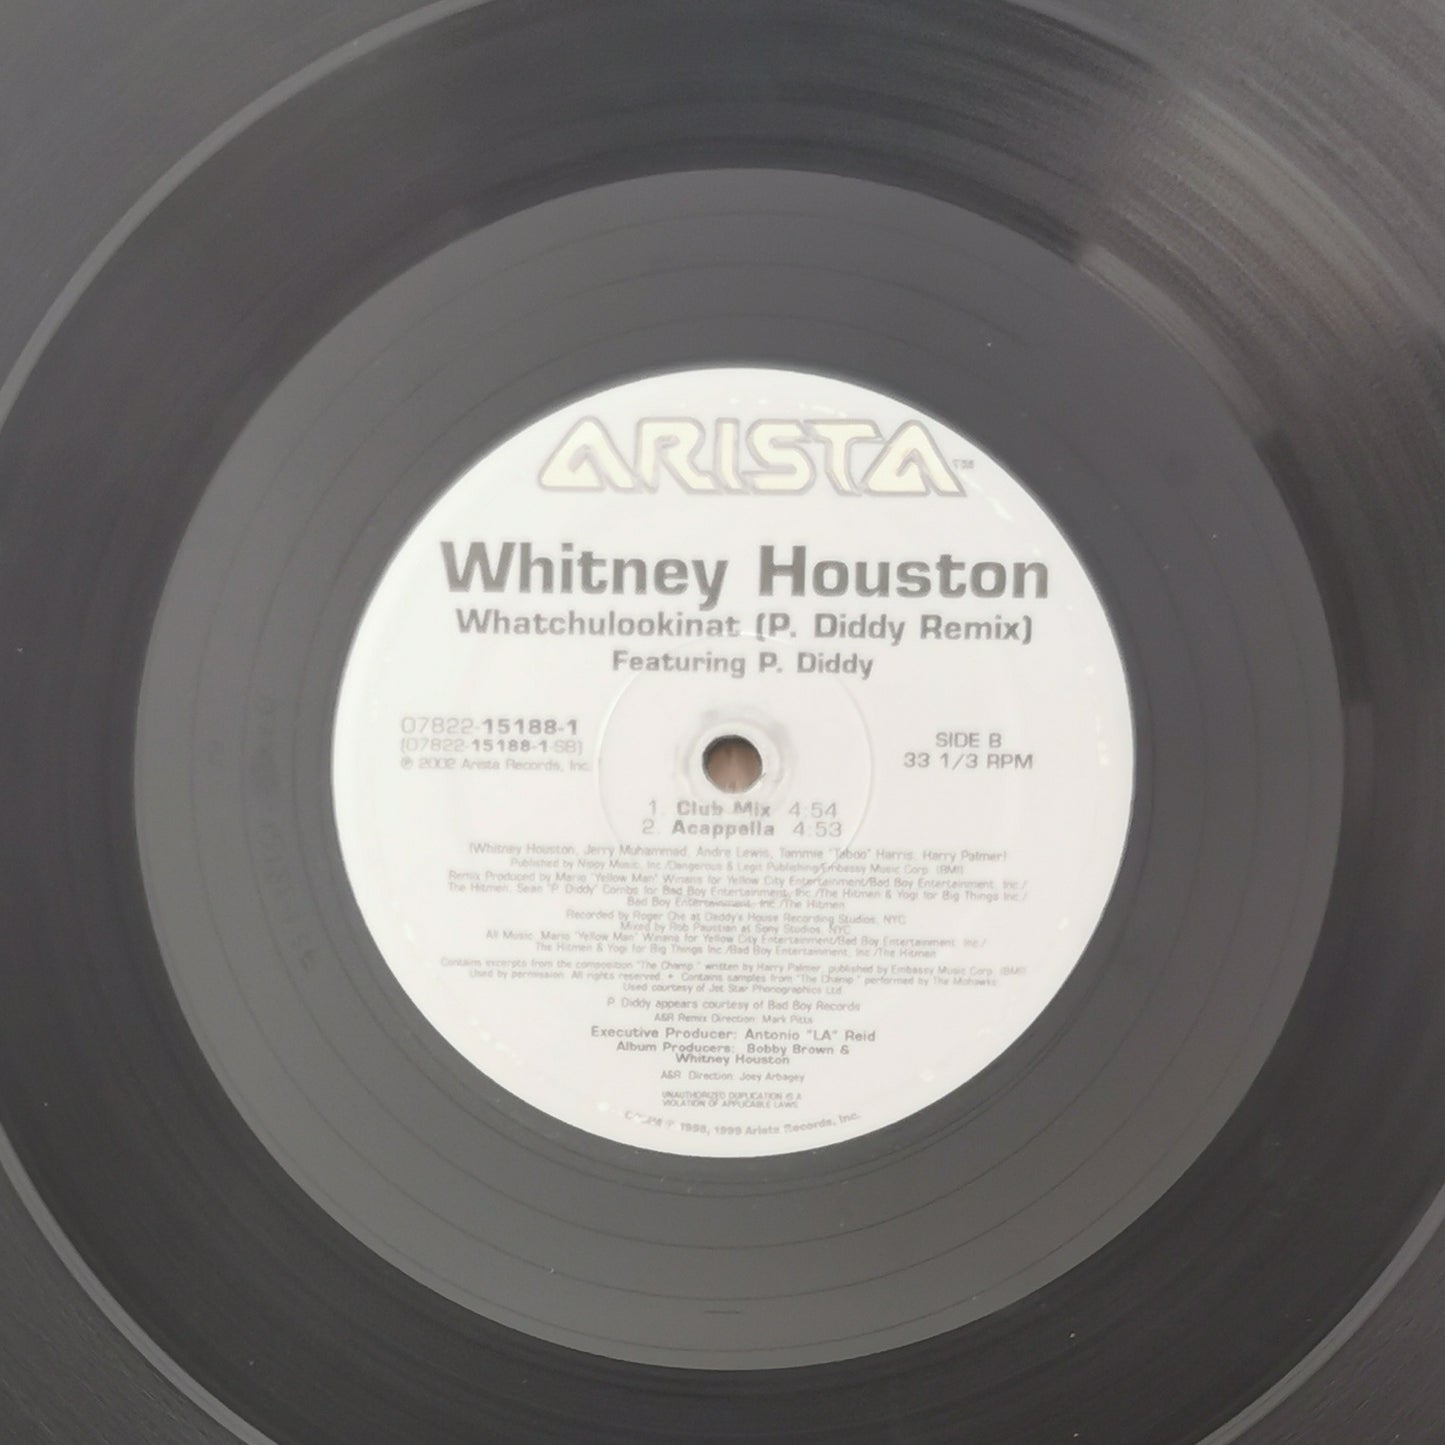 WHITNEY HOUSTON feat. P. DIDDY - Whatchulookinat (P. Diddy Remix)